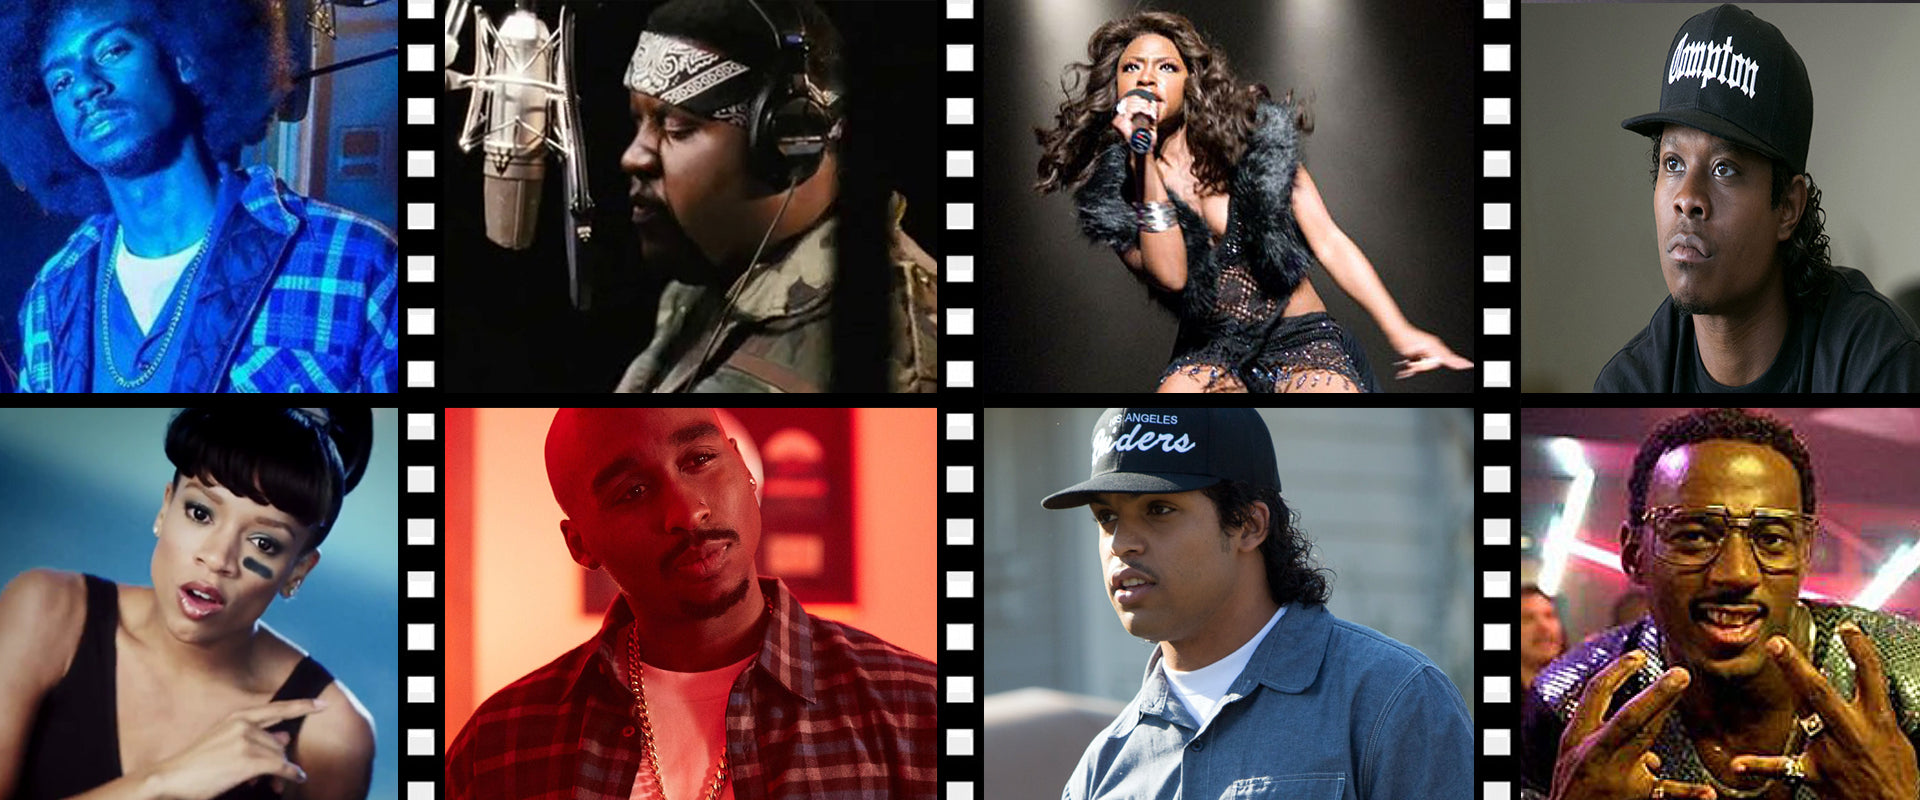 From 'Notorious' to '...Compton:' Ranking Rap Biopic Performances ...